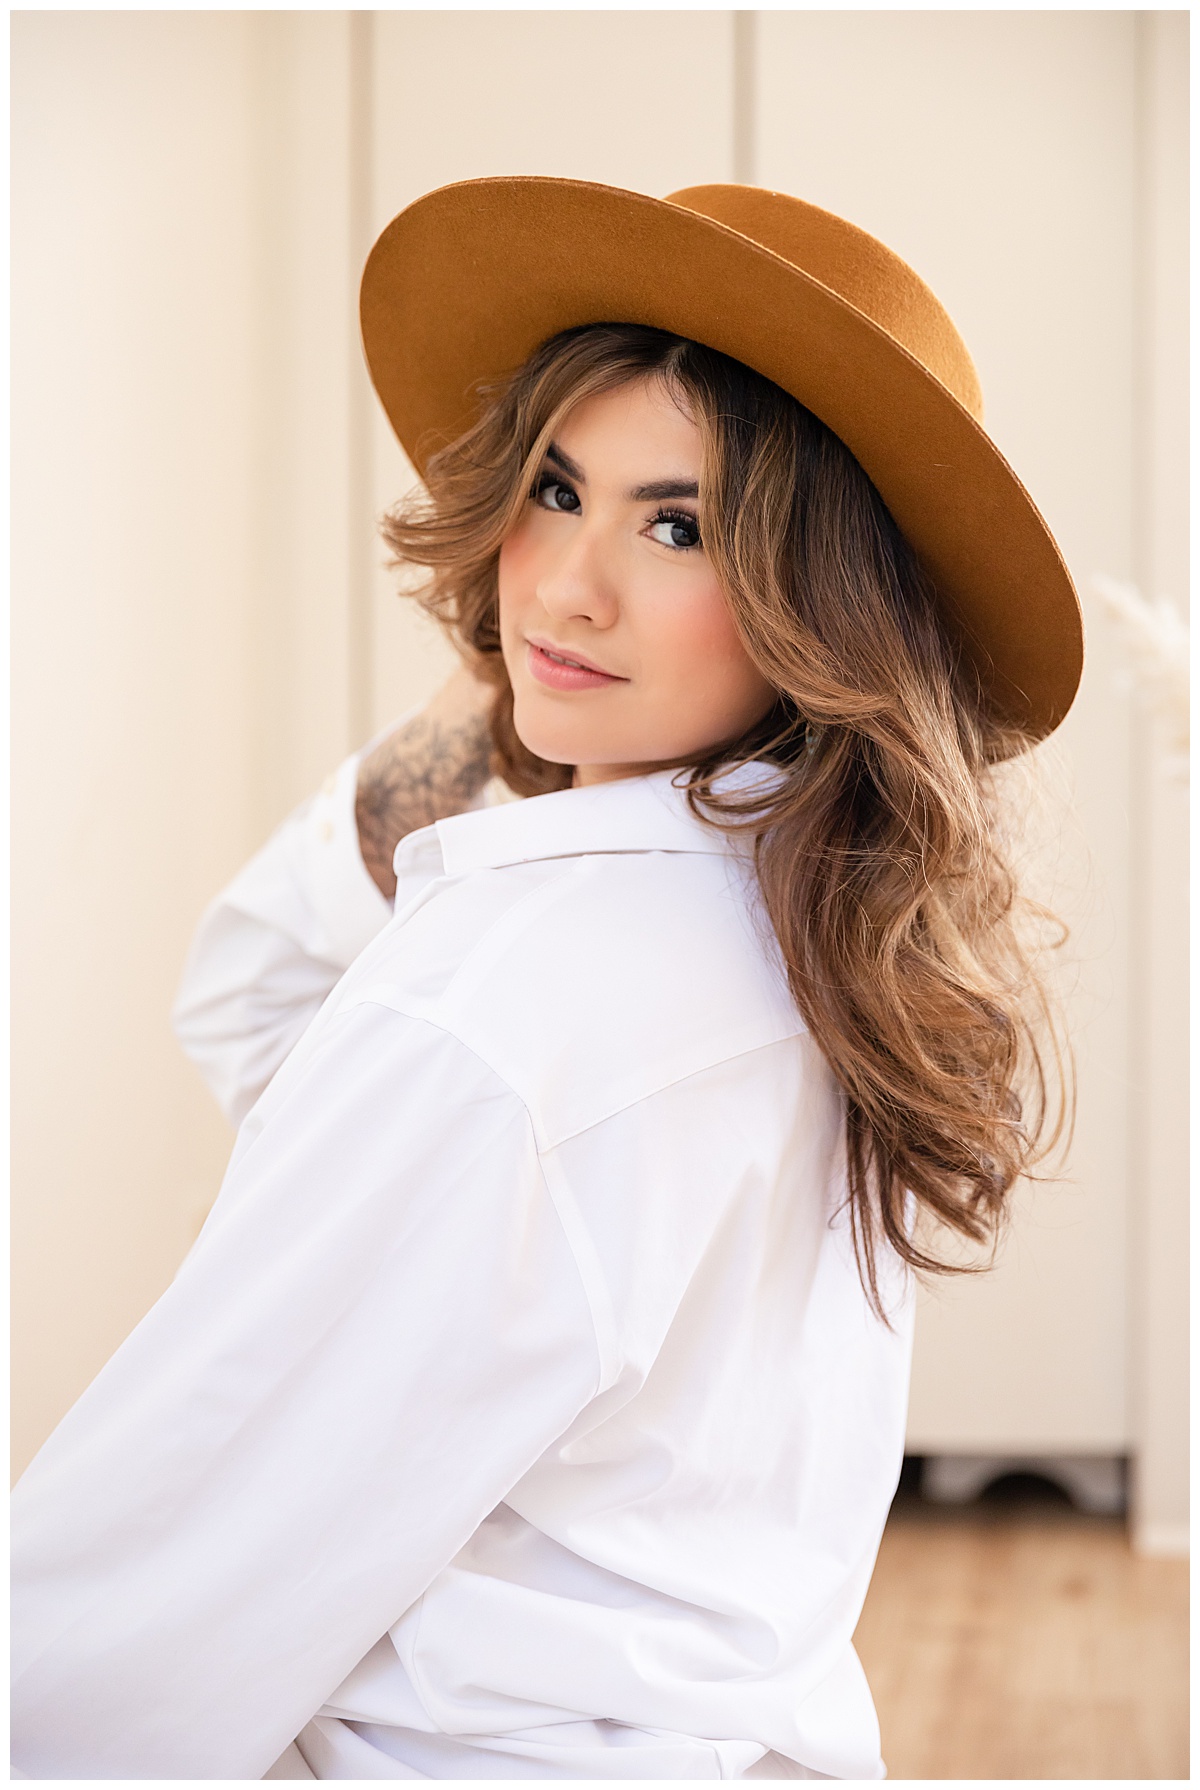 A woman poses in a white button-down shirt and a brown felt hat in a boudoir session